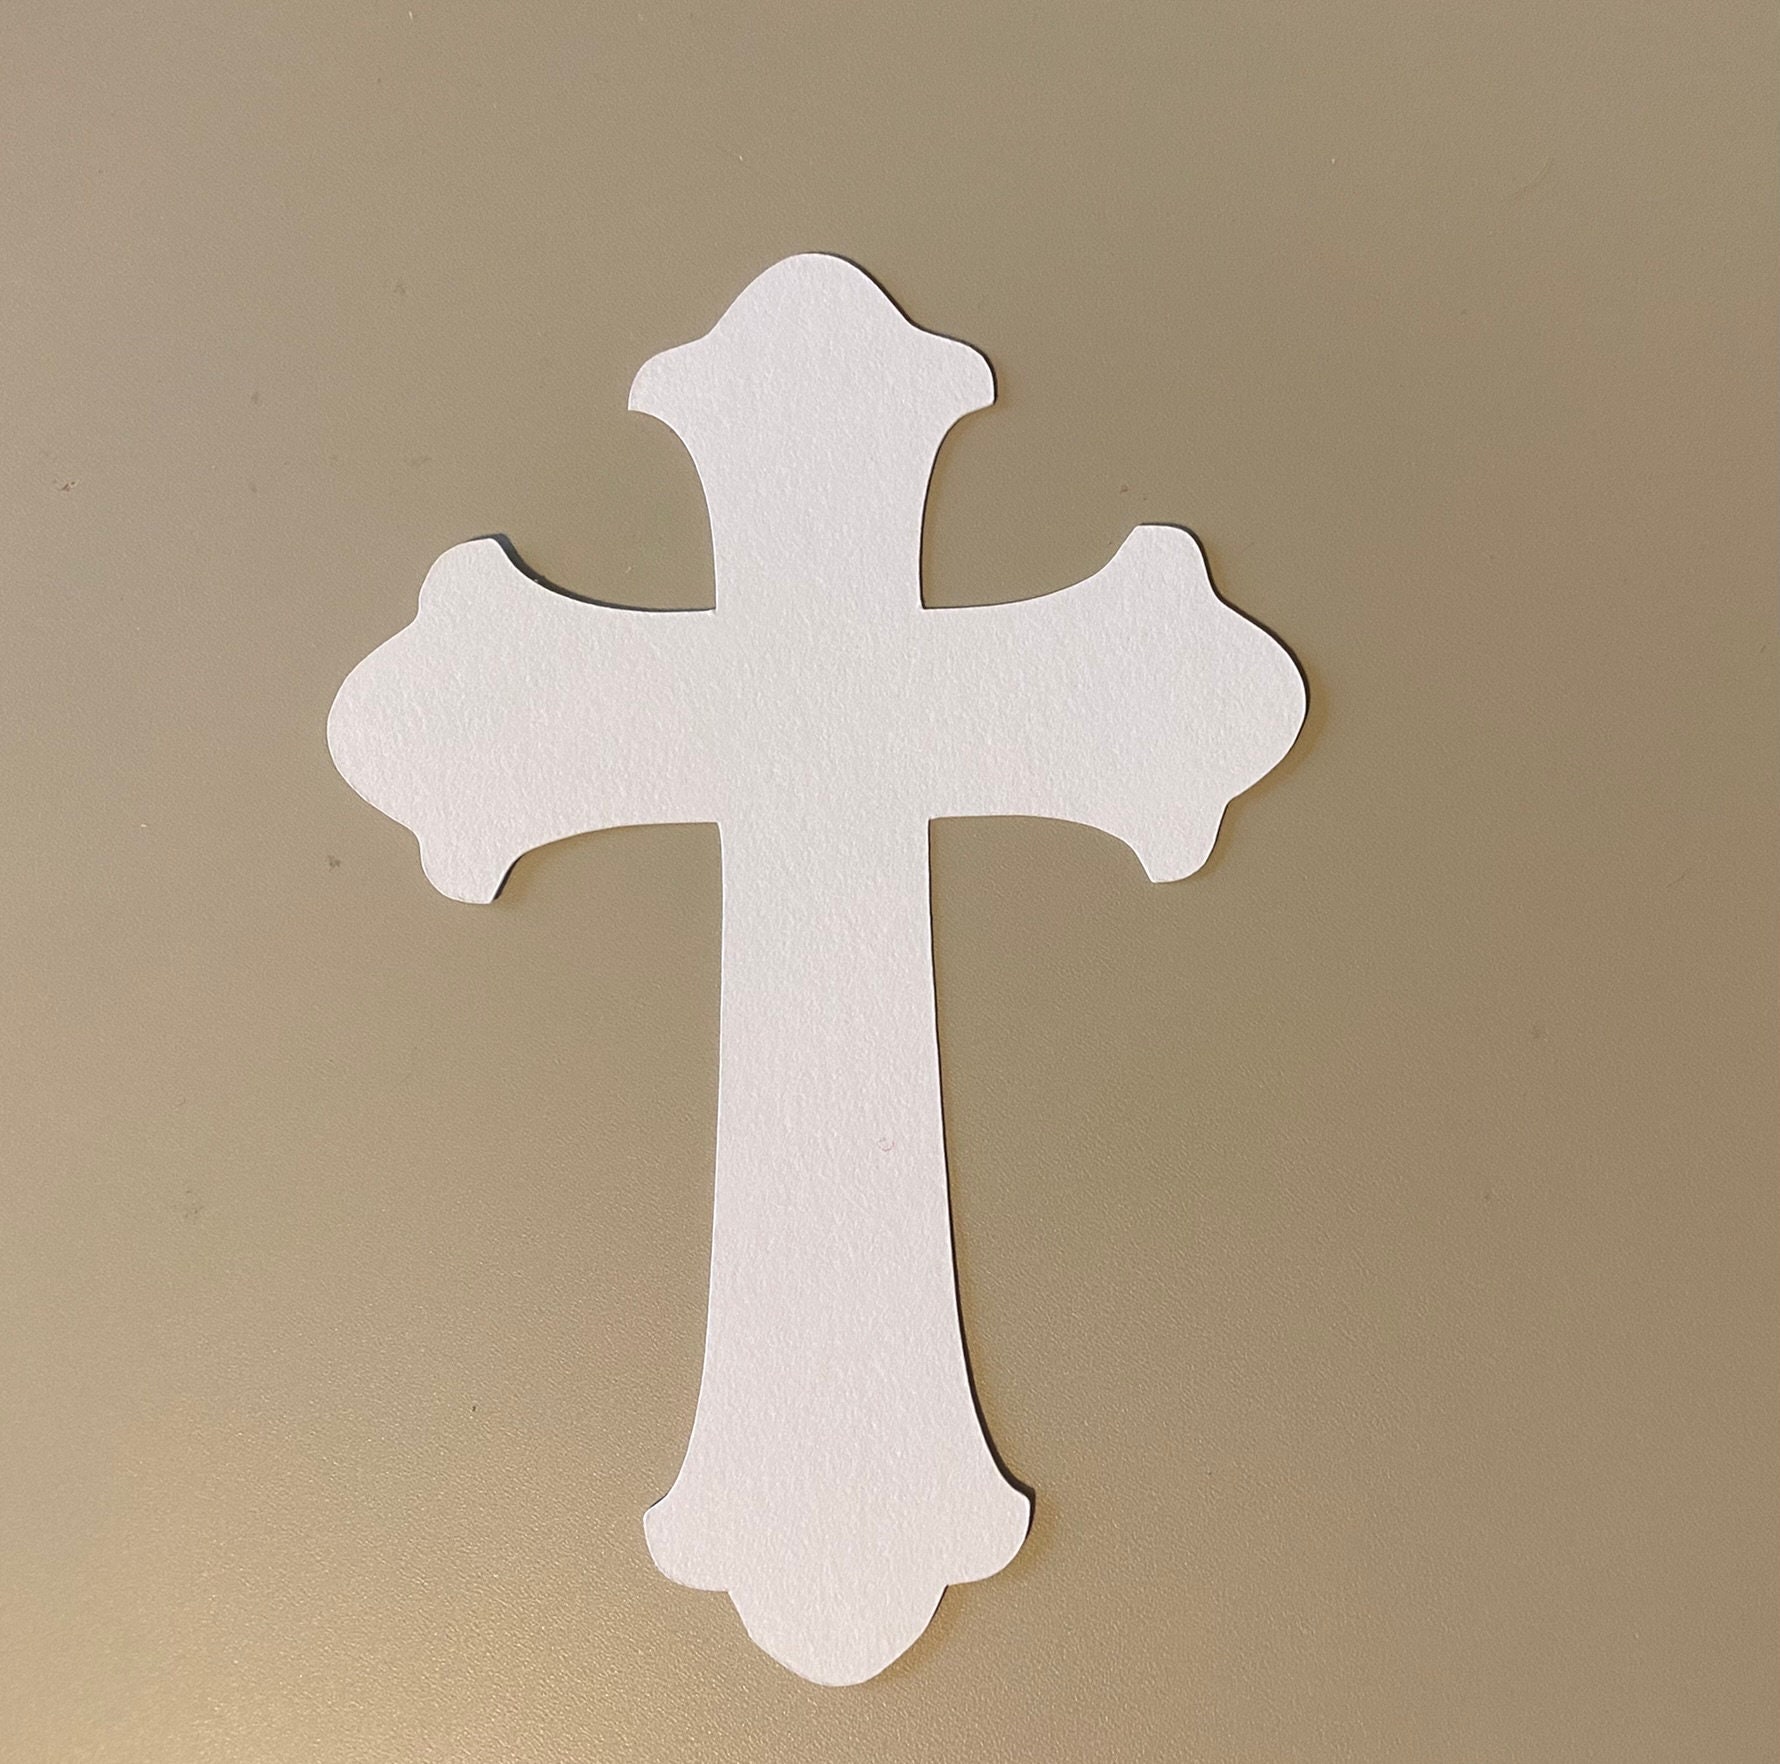 30 Paper Cross Die Cut 4 Inch Cross Cut Out Christmas Crafts 